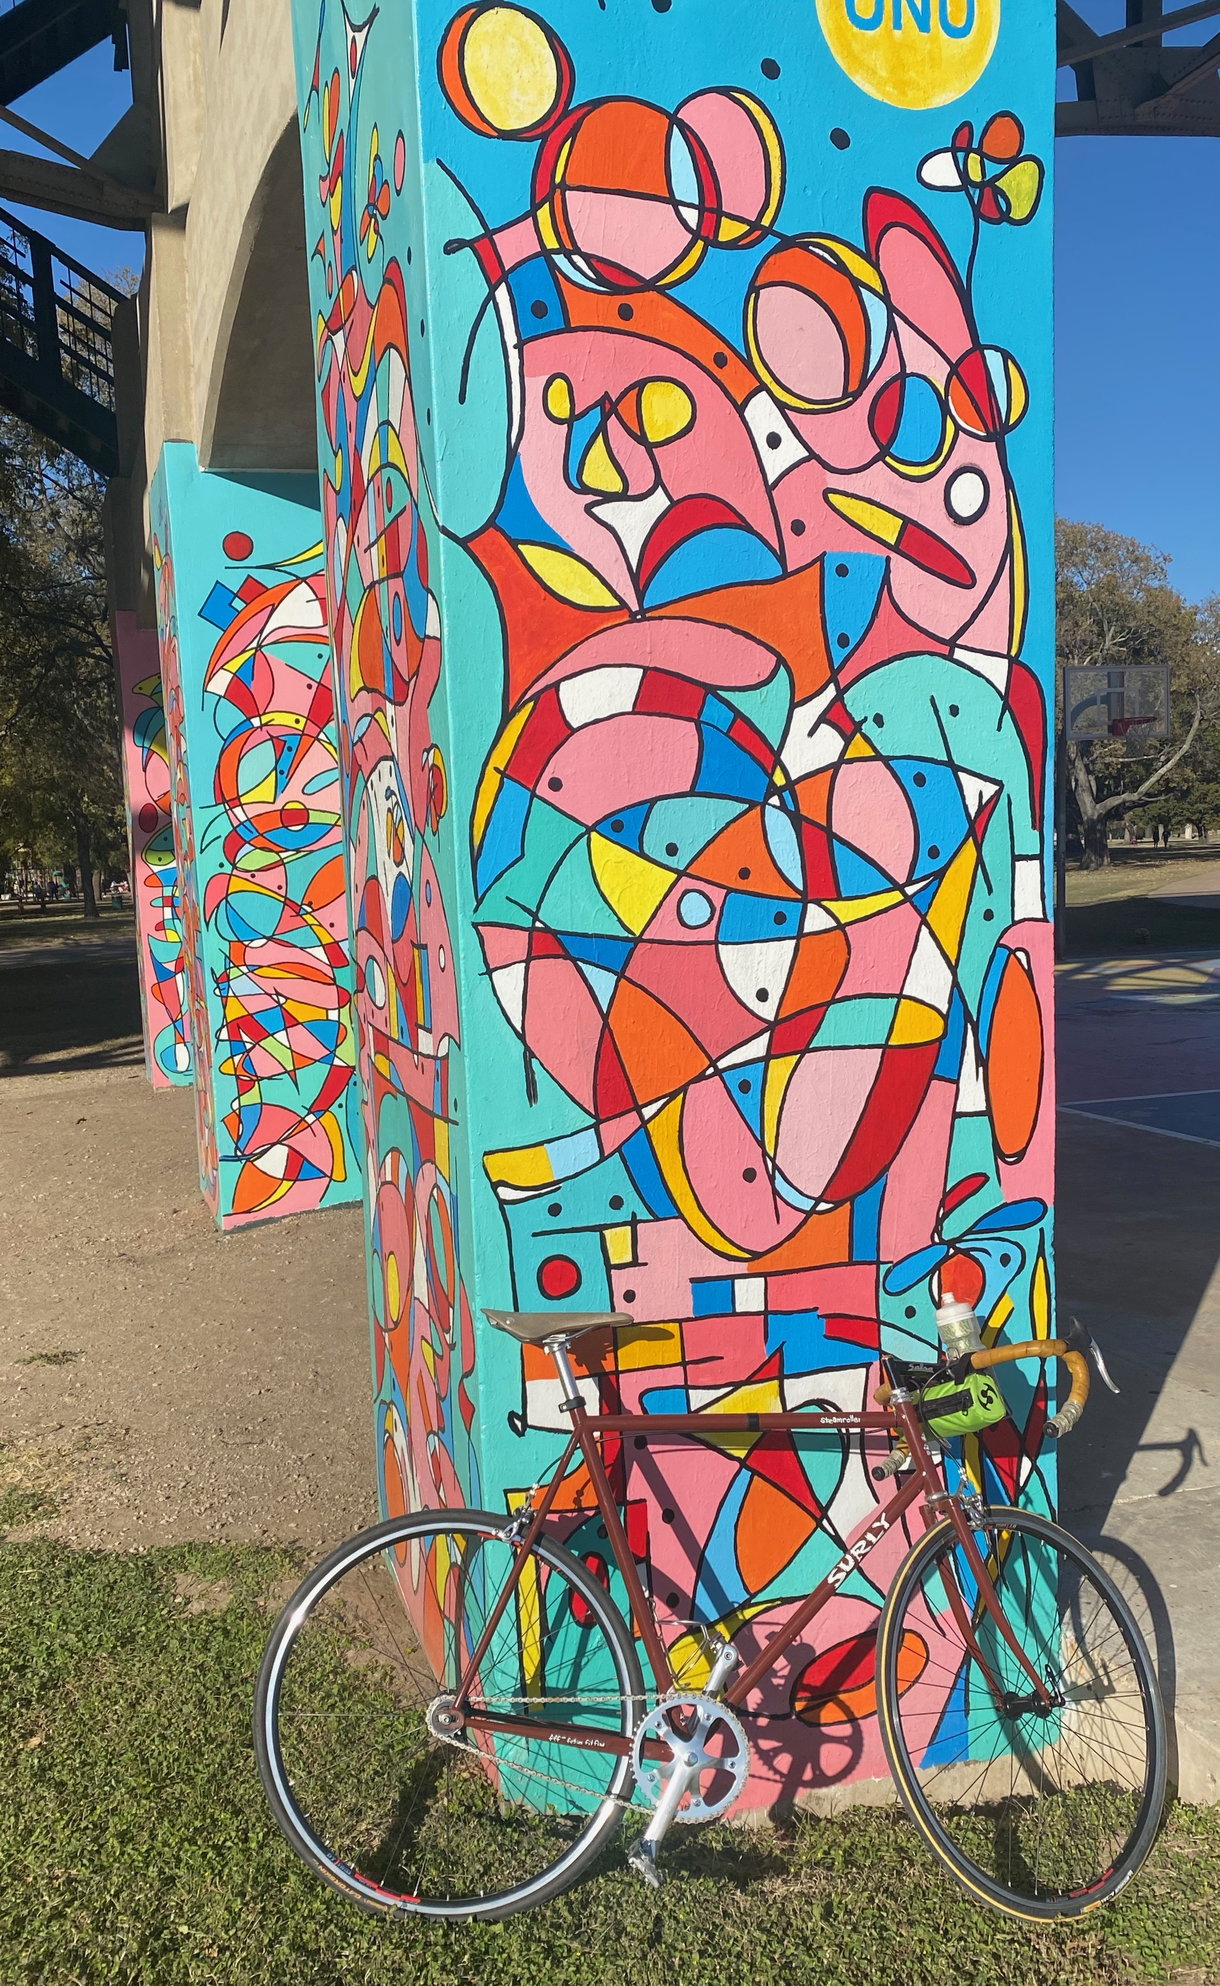 Bike Forums - Show me pics of your bike with graffiti